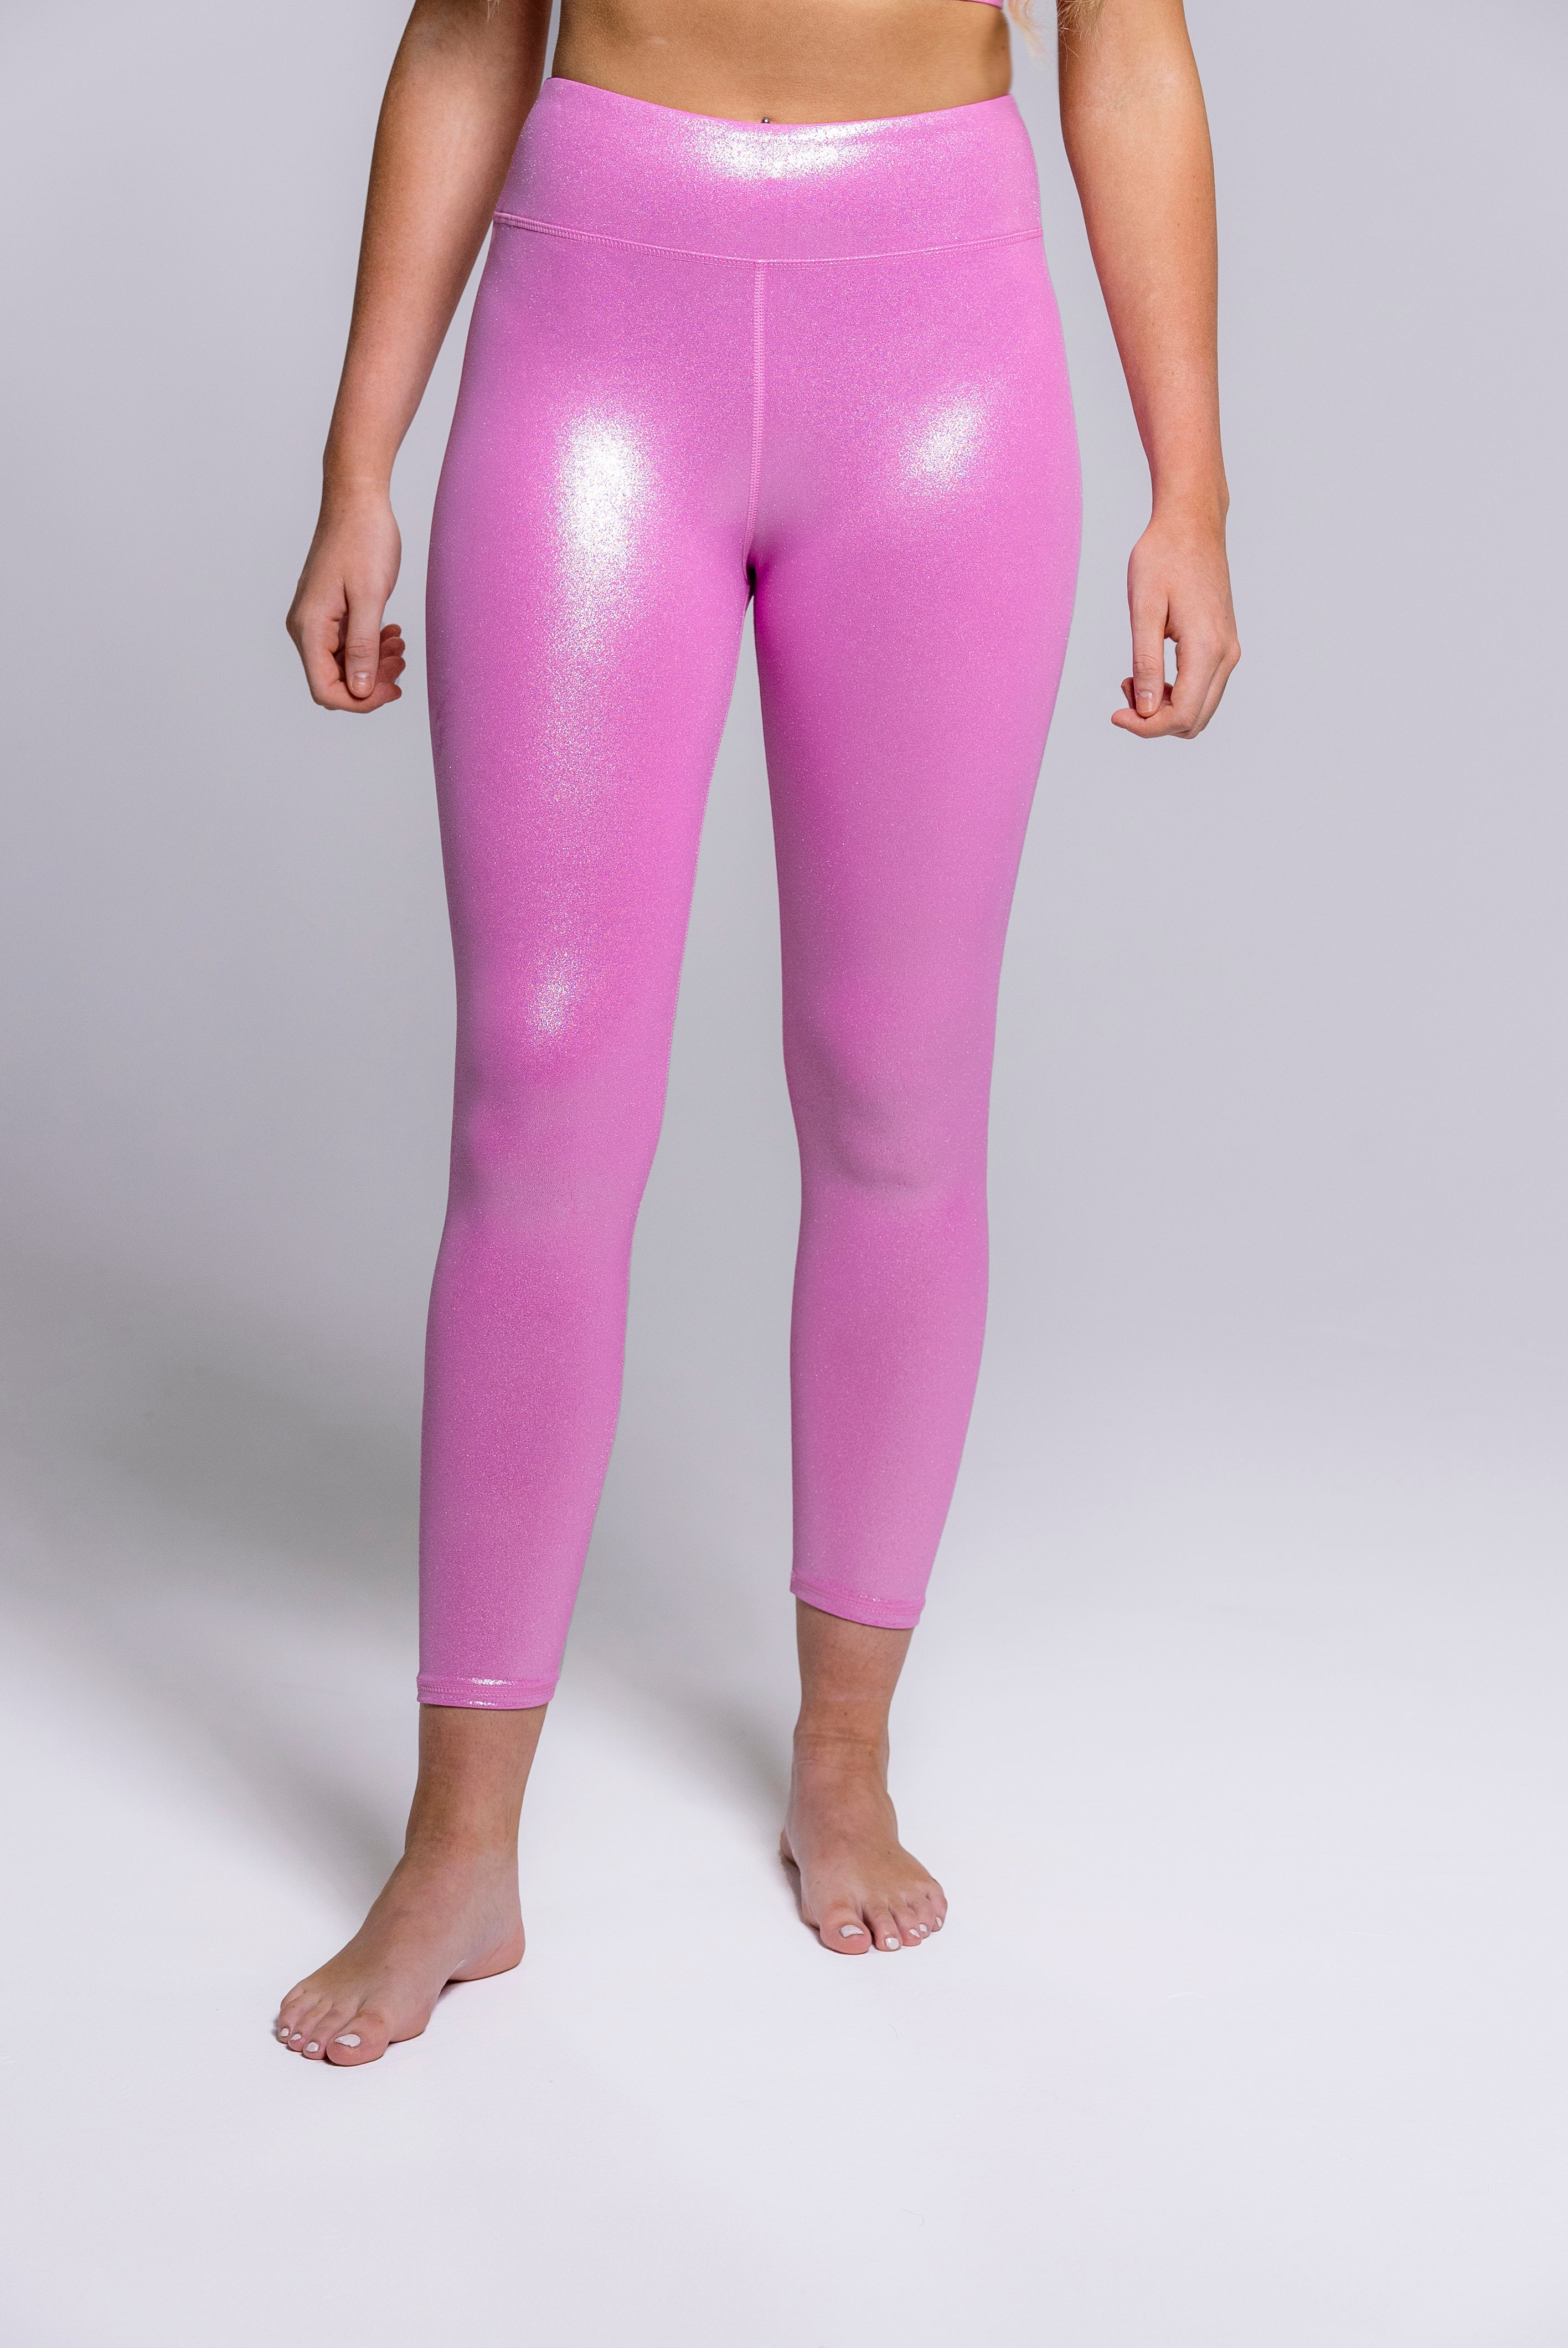 Description: The ultimate luxe performance legging. Super-soft in 4-way  stretch velour, Hot Pink Leggings has a …